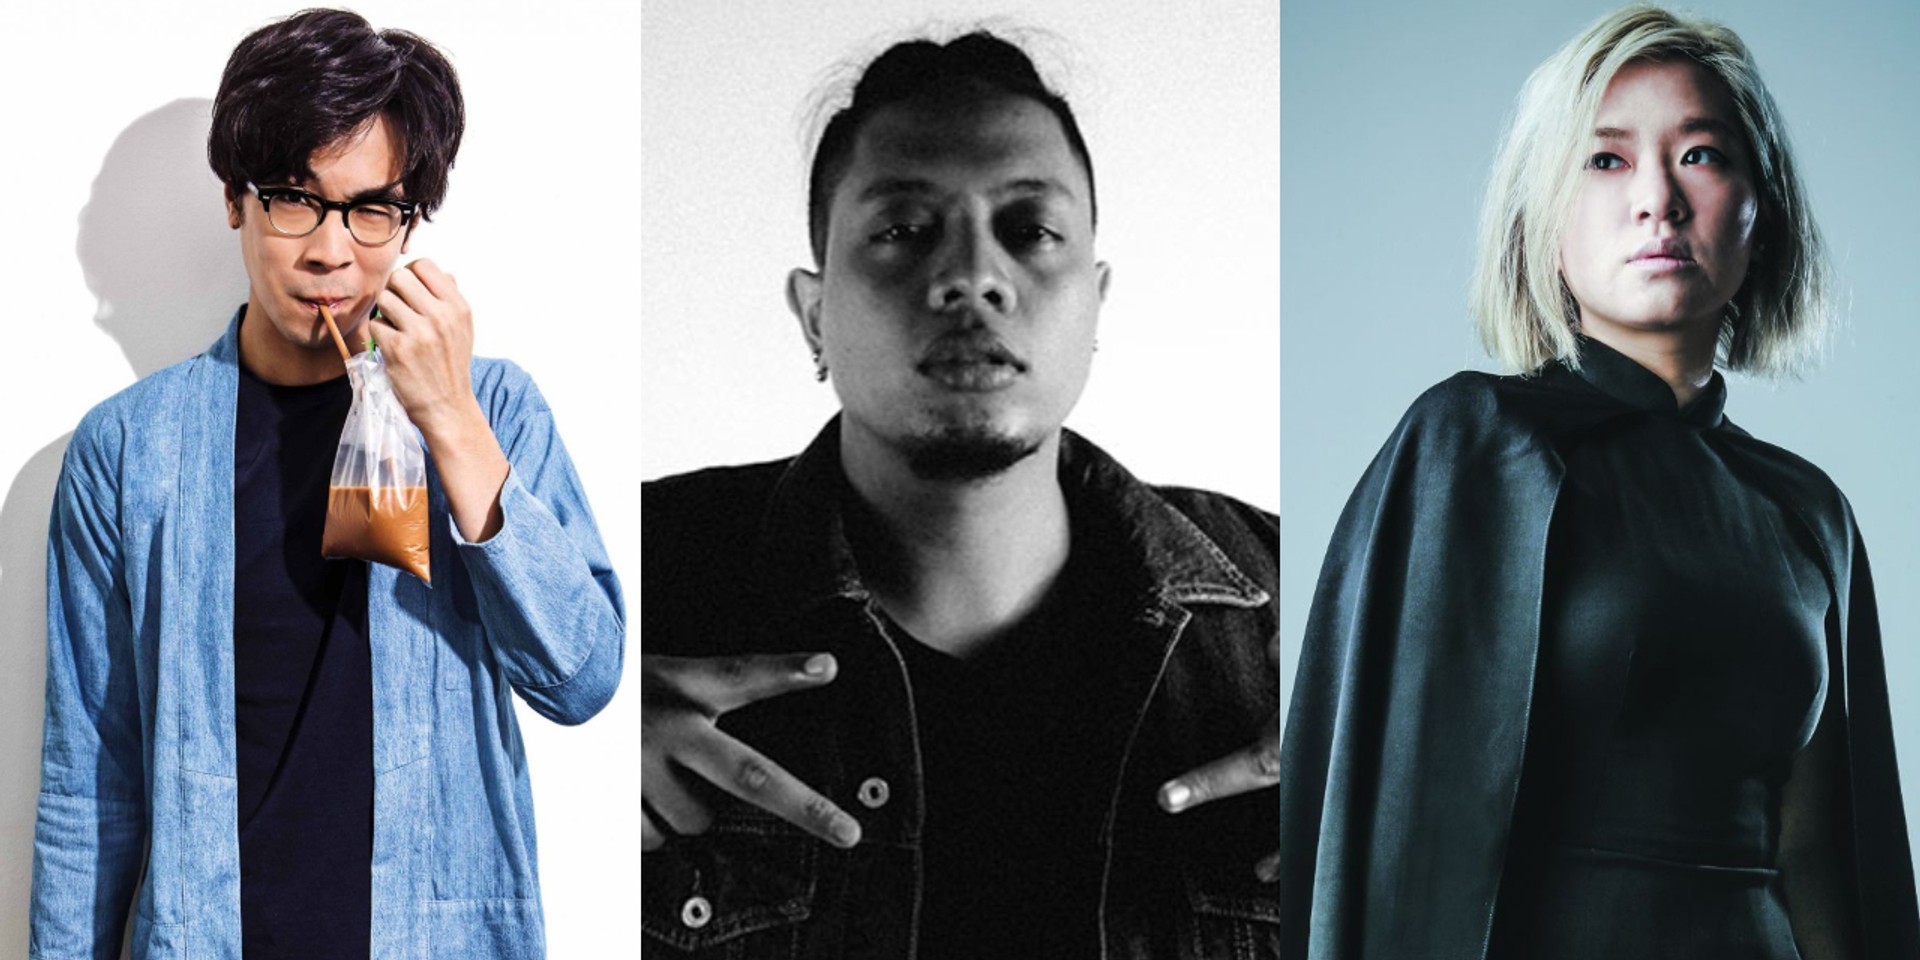 SCAPE Invasion announces Back To School Festival – Charlie Lim, Inch Chua, Akeem Jahat and more confirmed